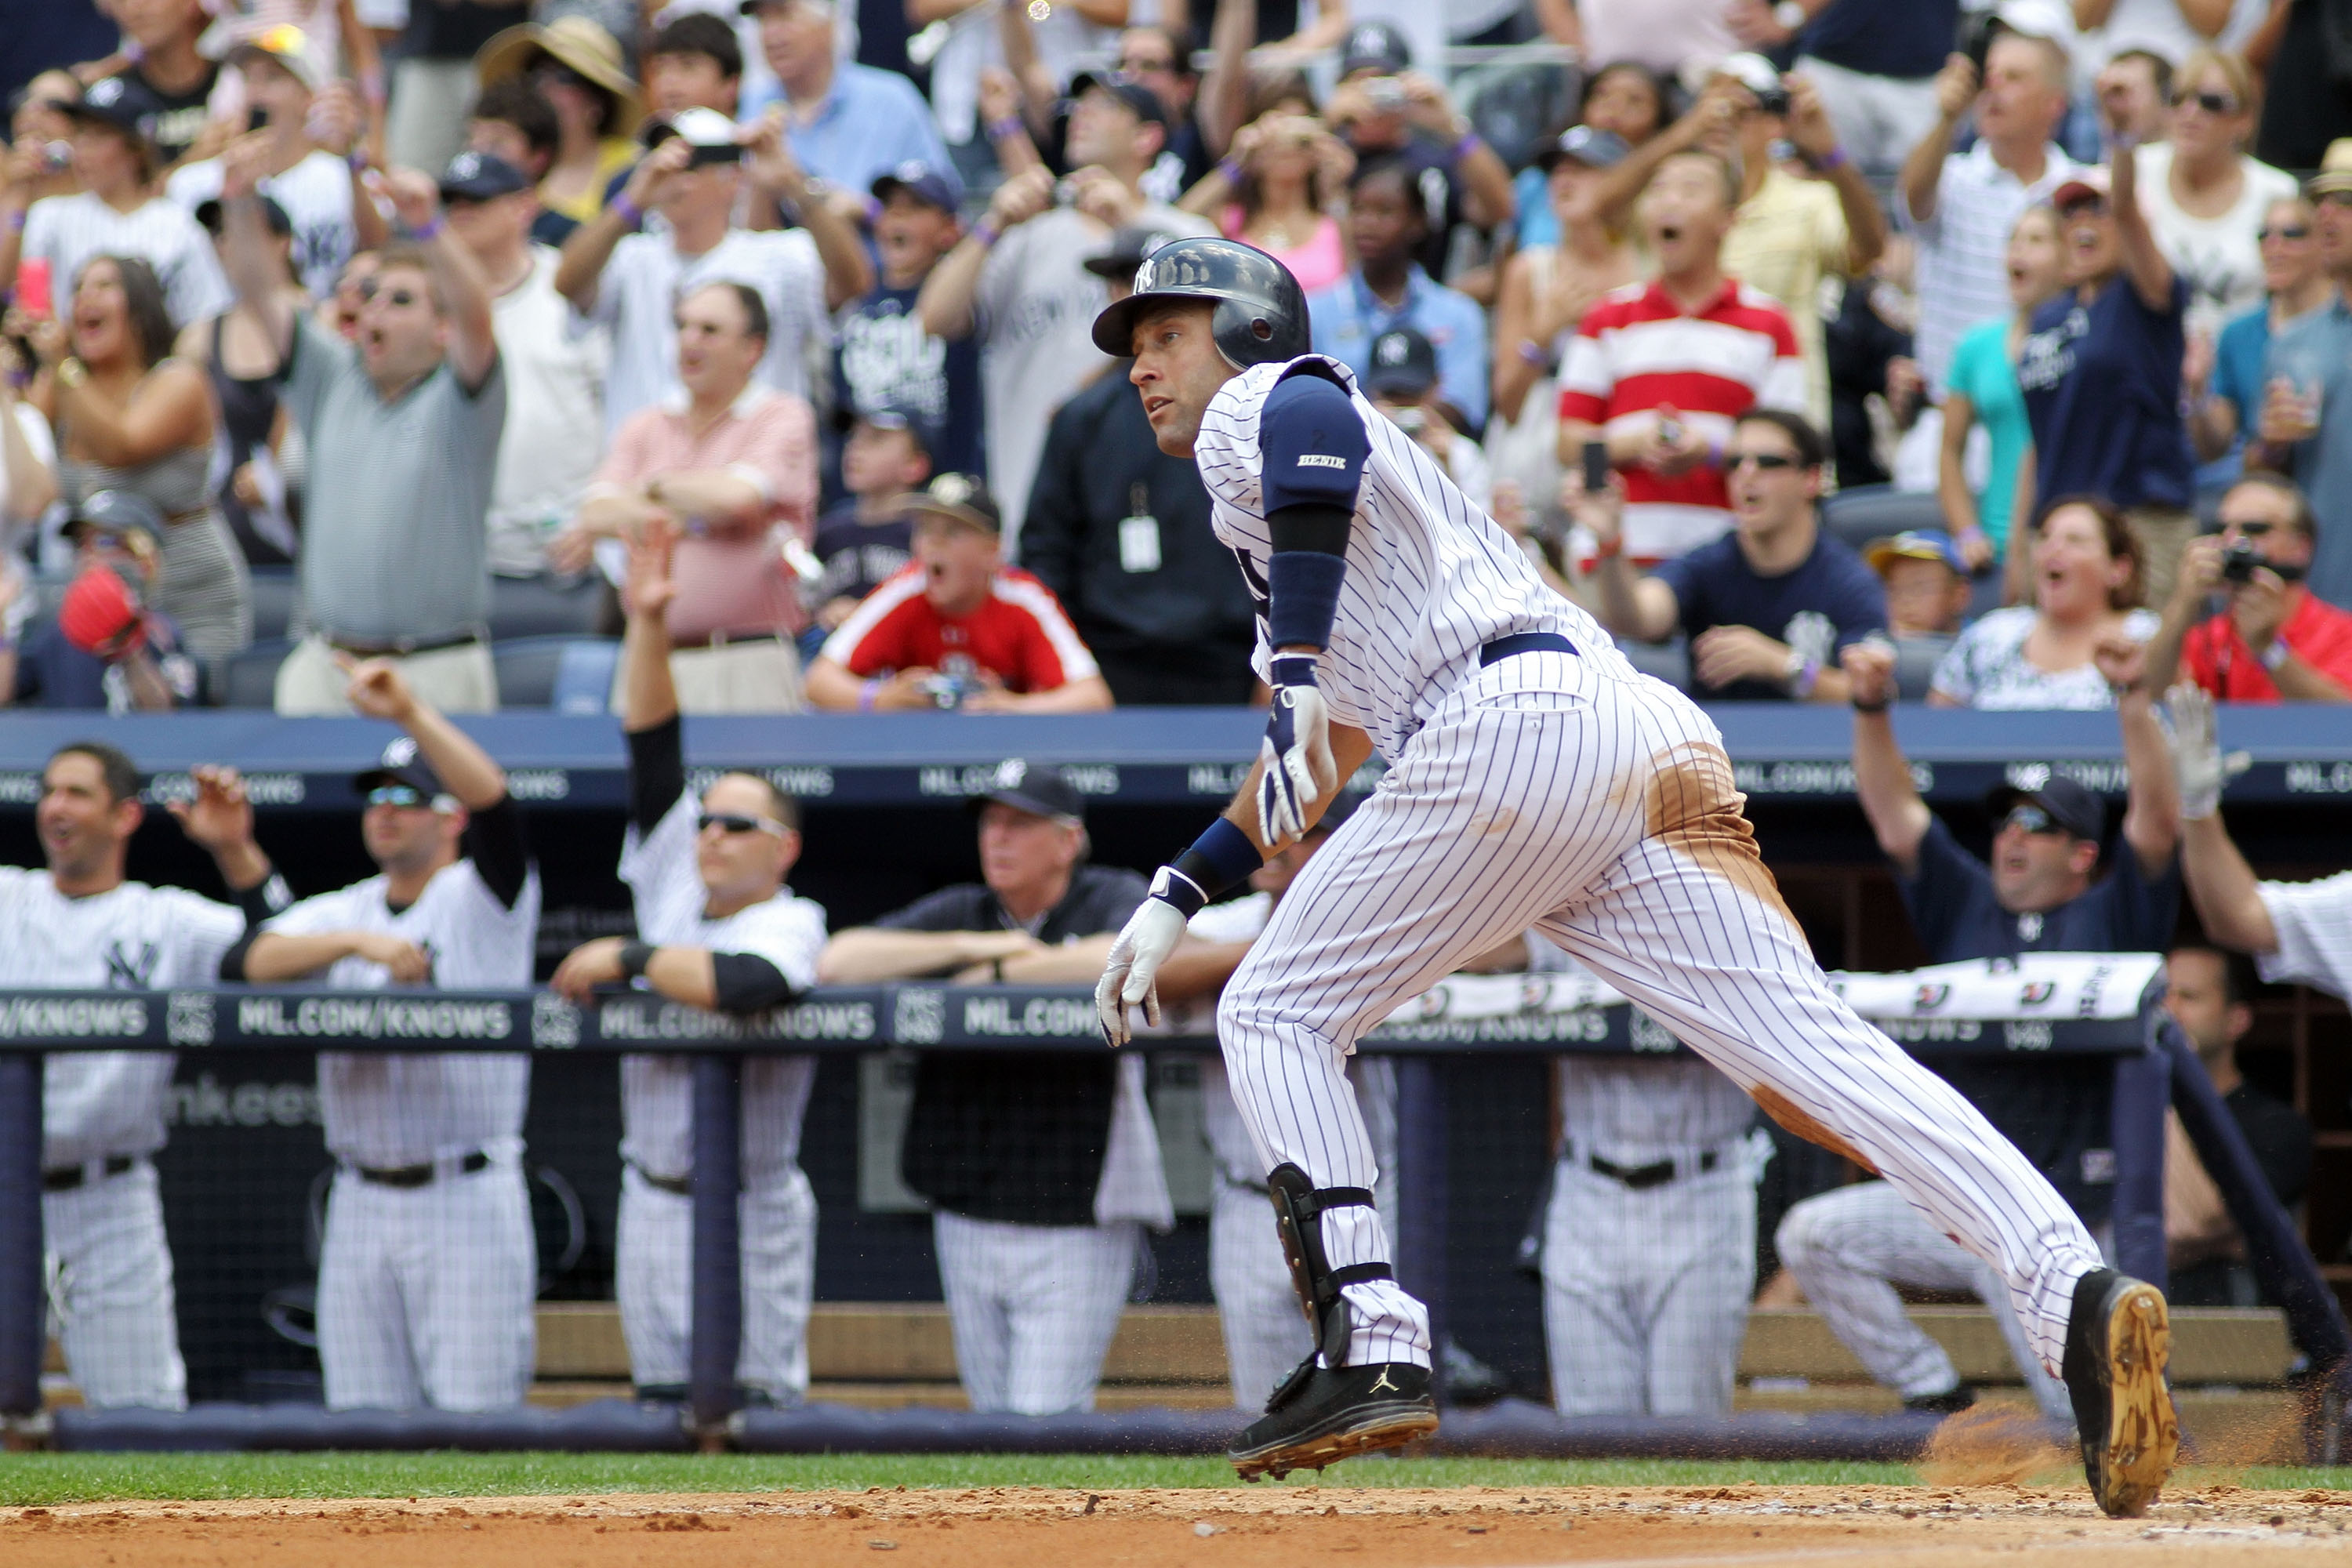 This Day in Yankees History: Derek Jeter reaches another milestone